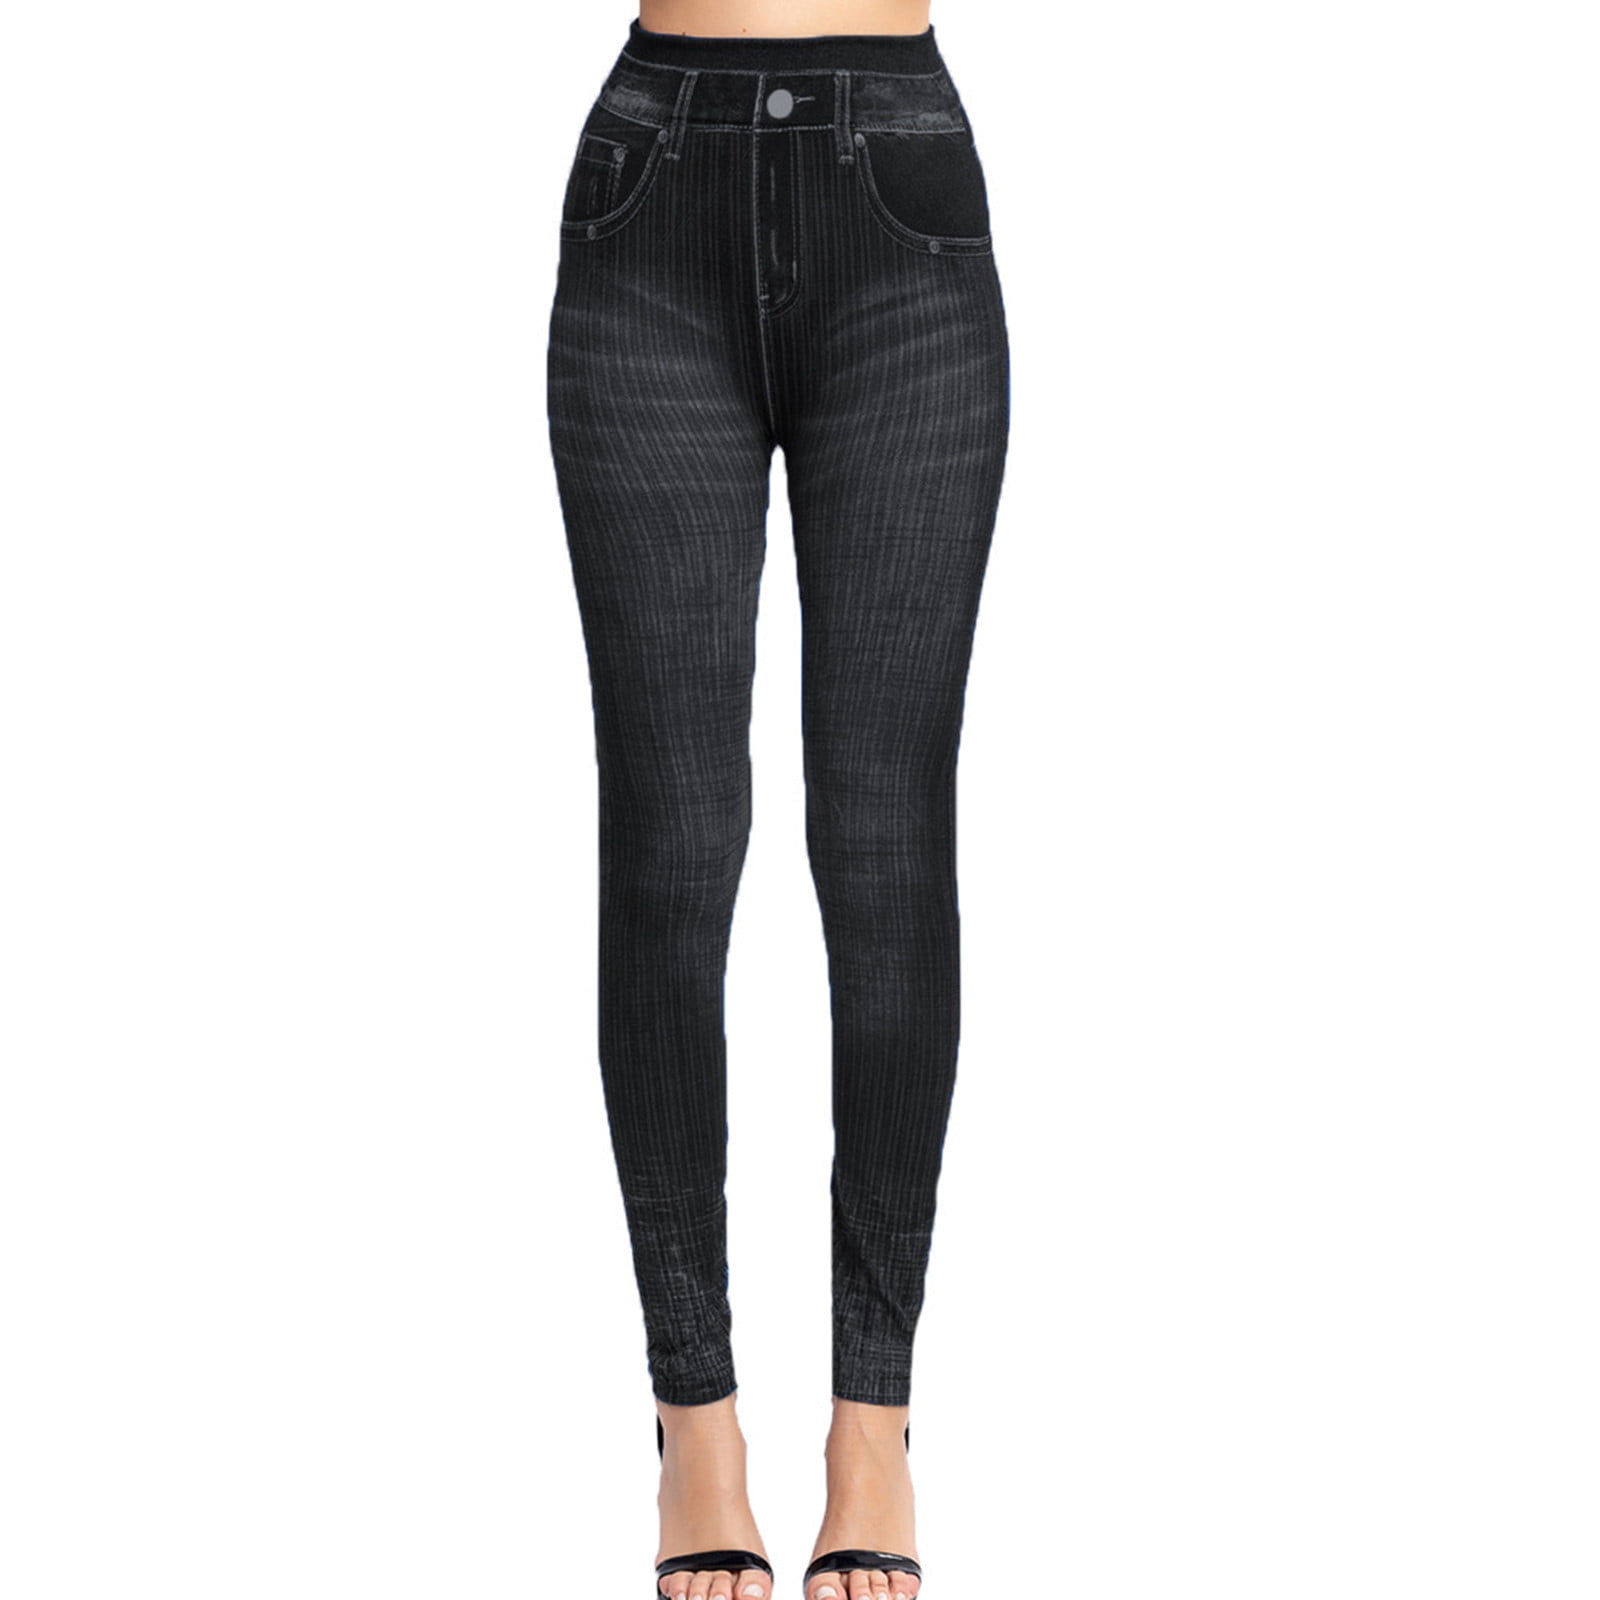 Xysaqa Womens Skinny Jeans Look Leggings, High Waisted Stretch Butt ...